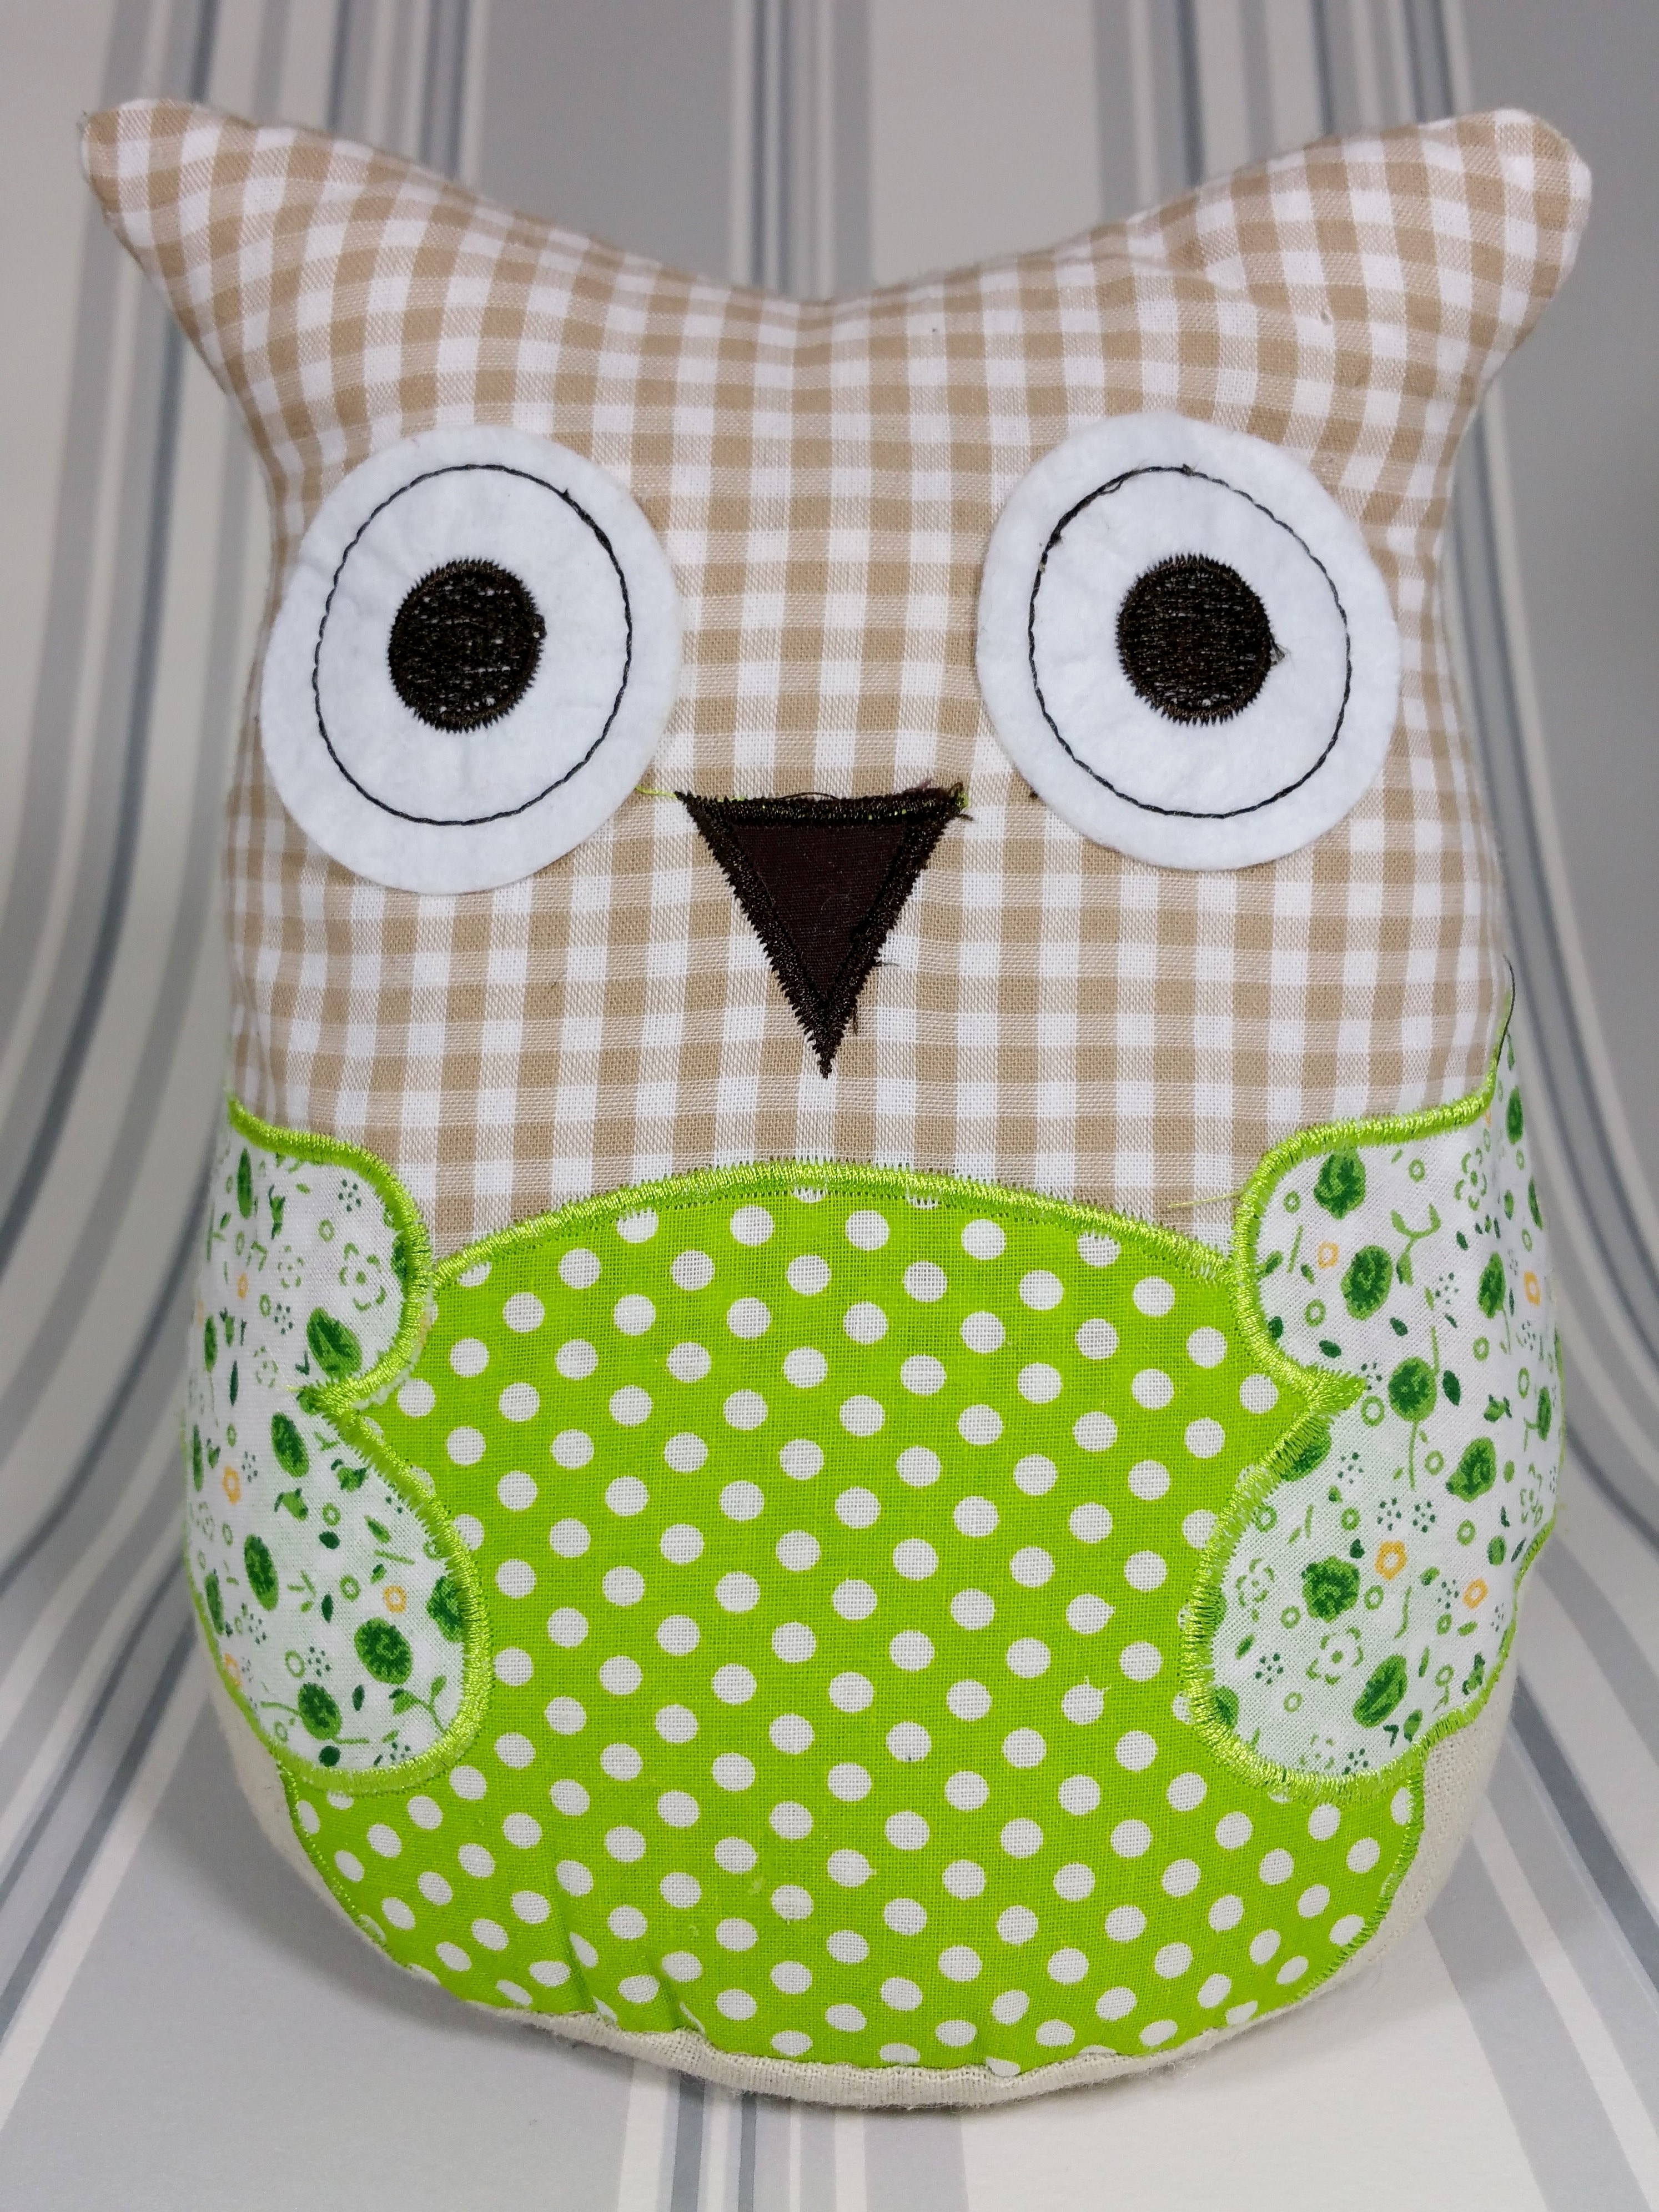 brown white and green polka dot gingham owl shaped pillow